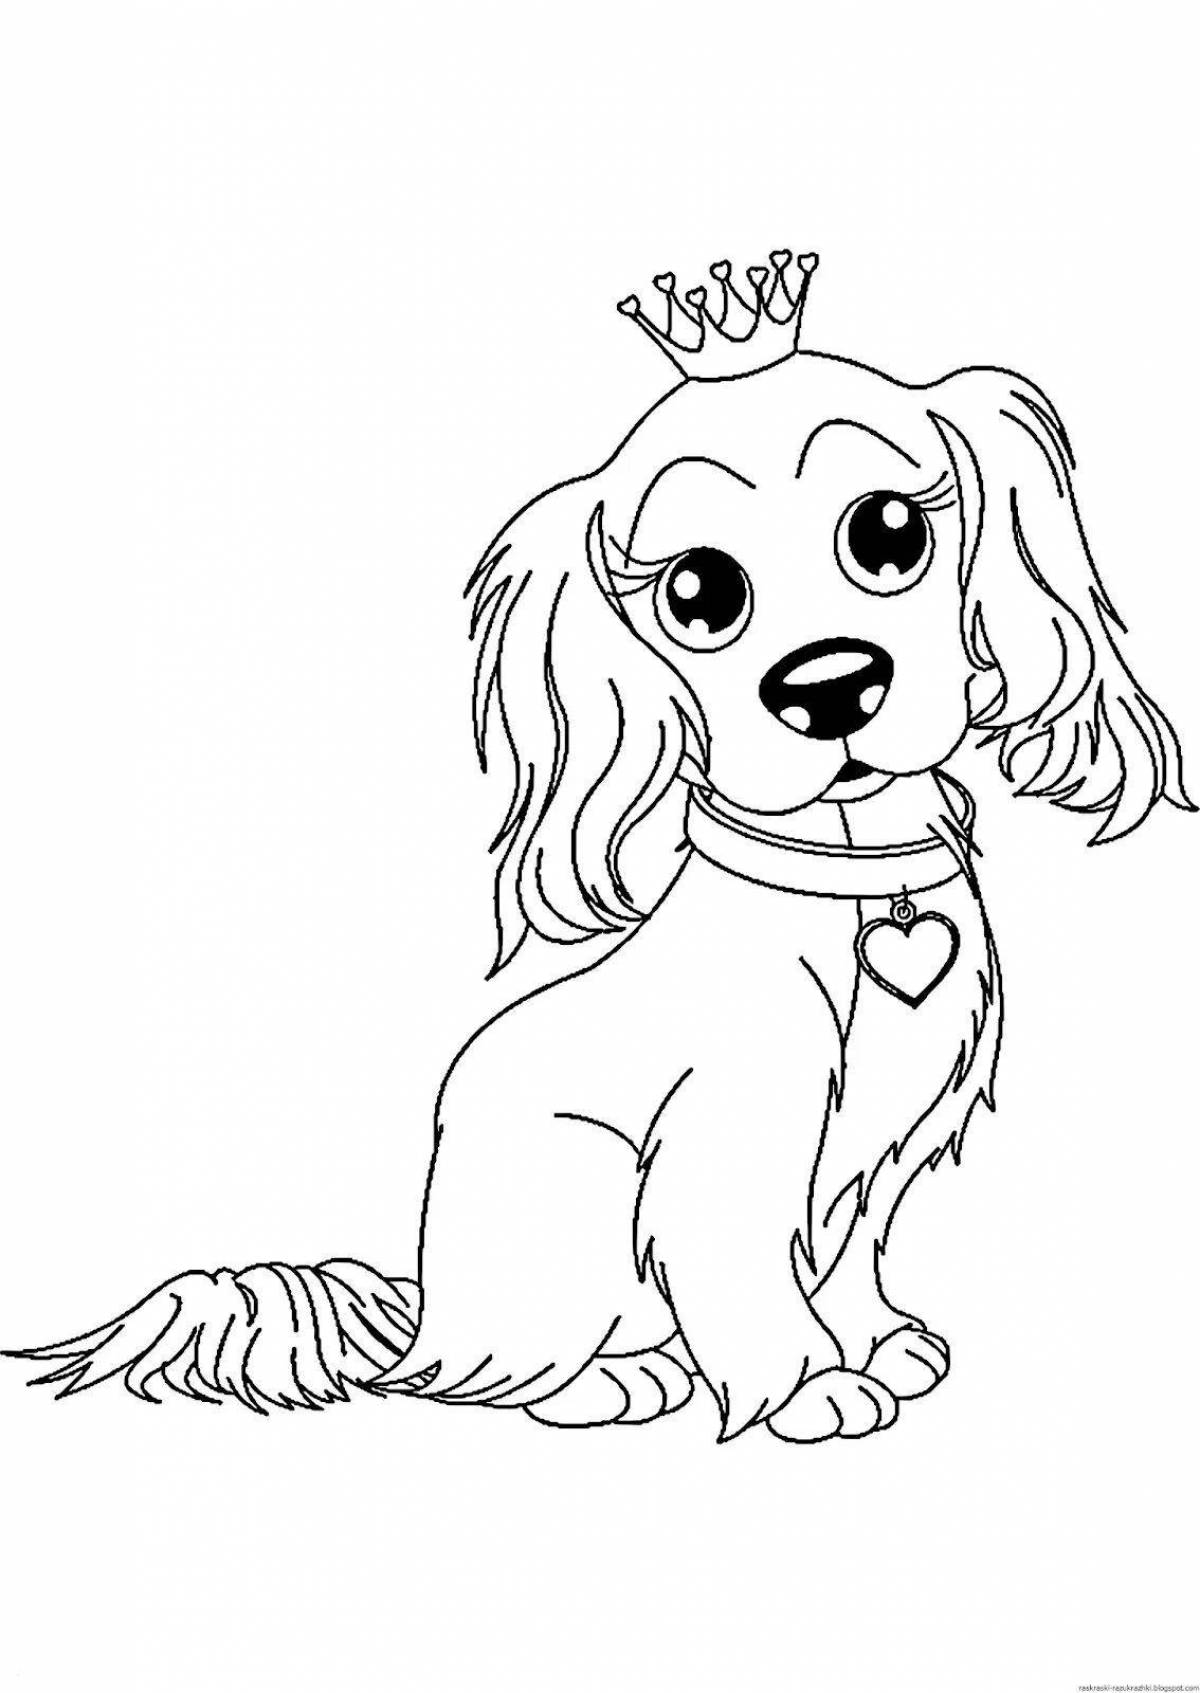 Snuggly puppy coloring page